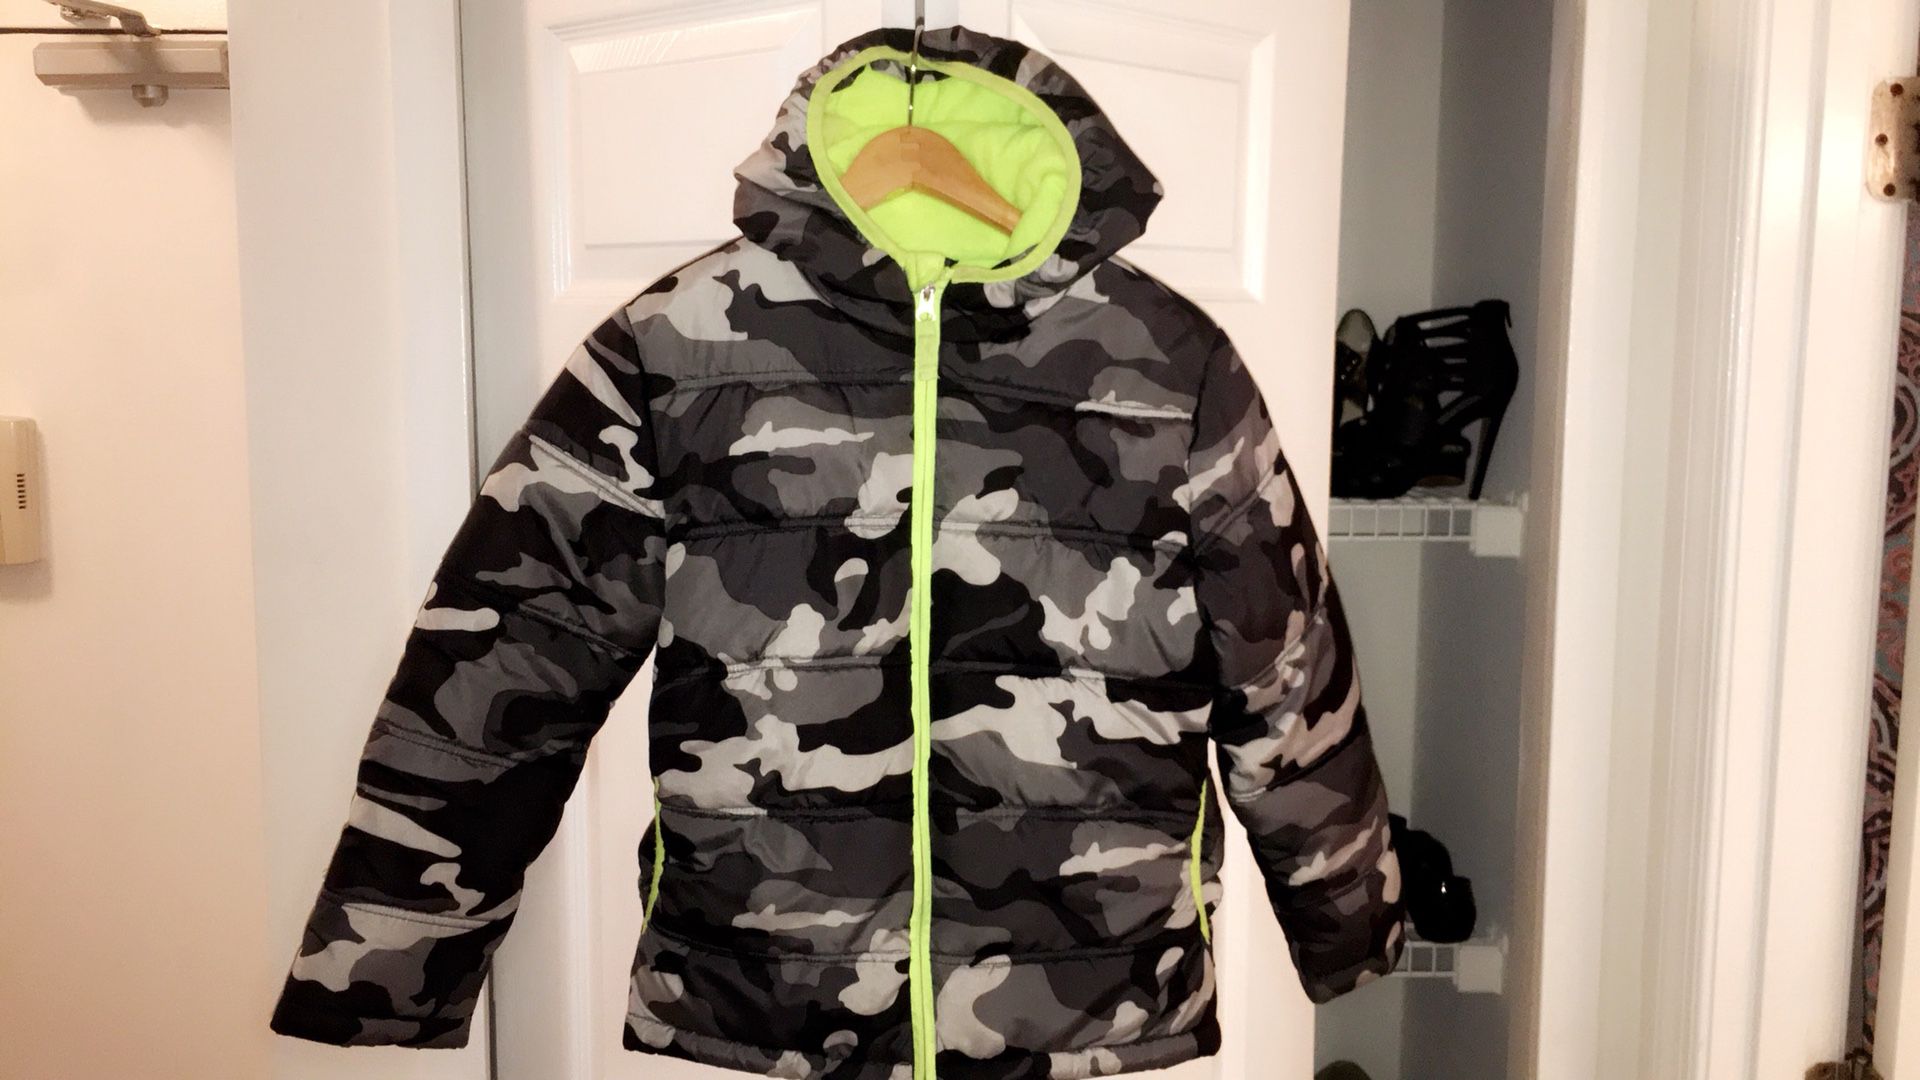 Black, green, and gray camouflage zip-up bubble jacket